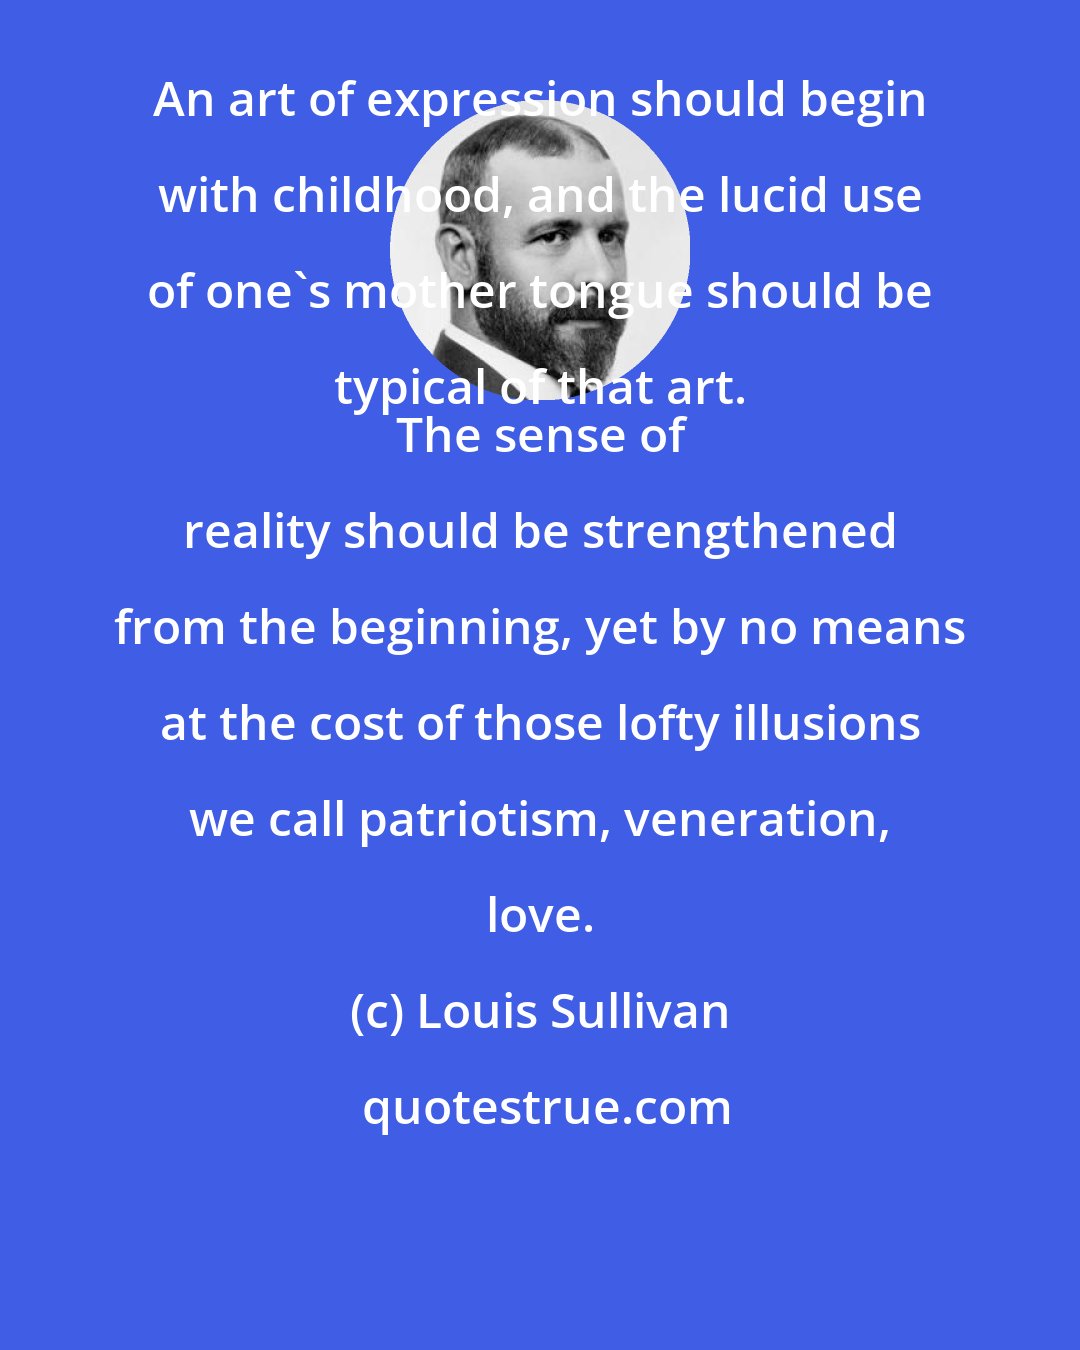 Louis Sullivan: An art of expression should begin with childhood, and the lucid use of one's mother tongue should be typical of that art. 
 The sense of reality should be strengthened from the beginning, yet by no means at the cost of those lofty illusions we call patriotism, veneration, love.